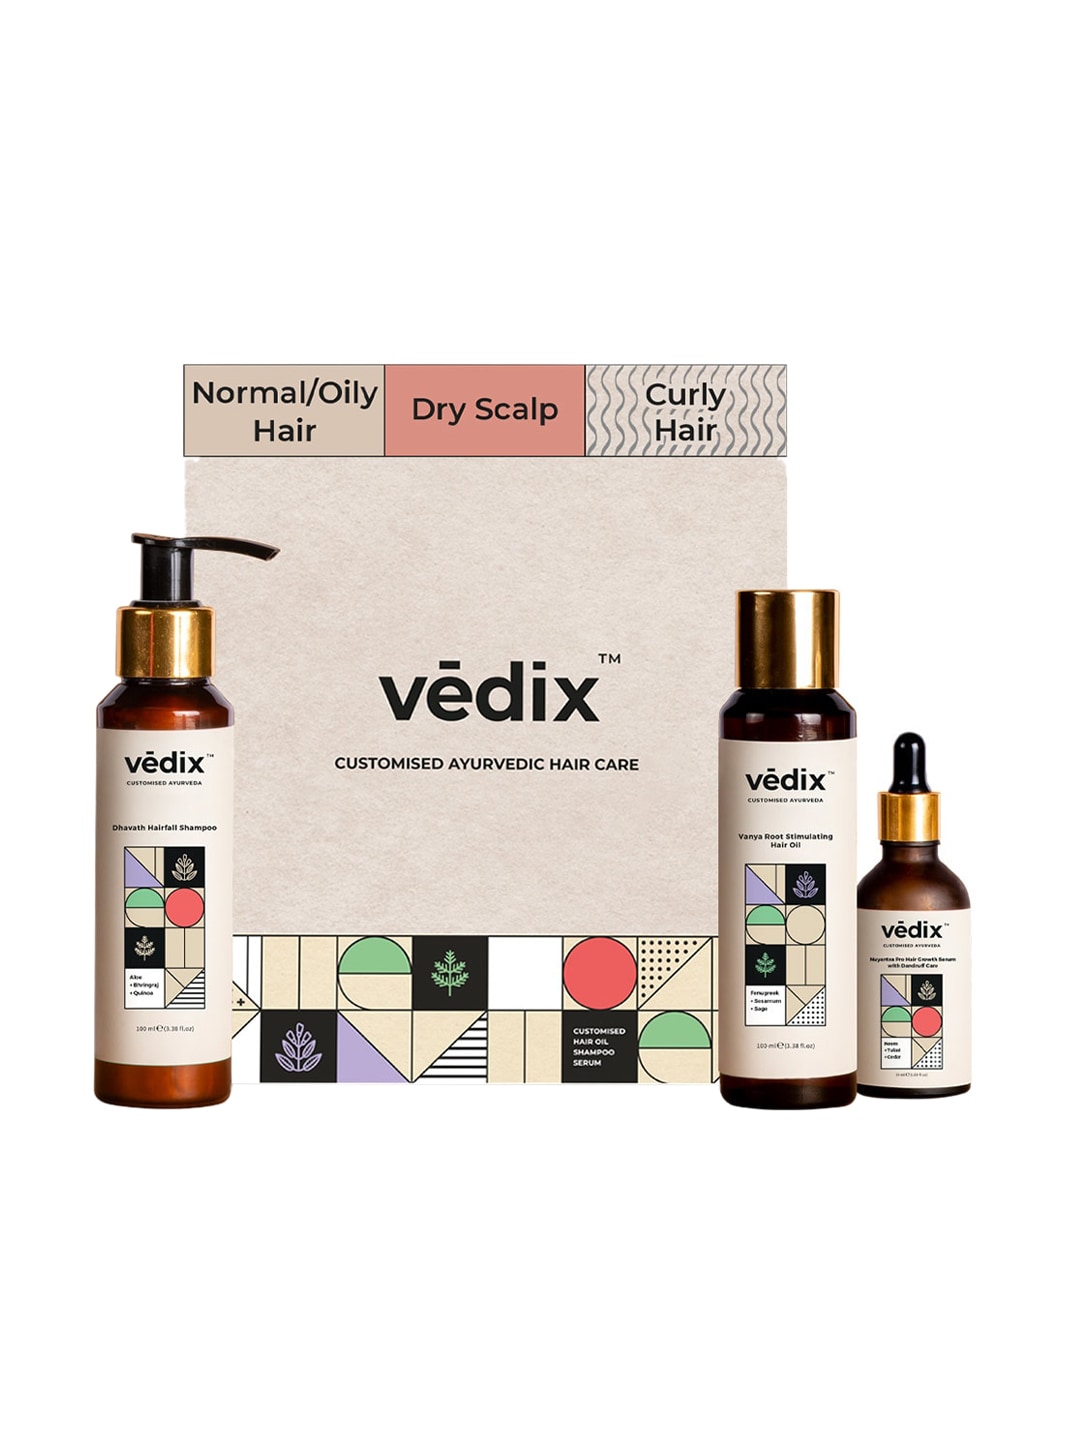 Vedix Hair Fall Control Regimen-Normal/Oily Hair with Dandruff-Dry Scalp Curly Hair Price in India